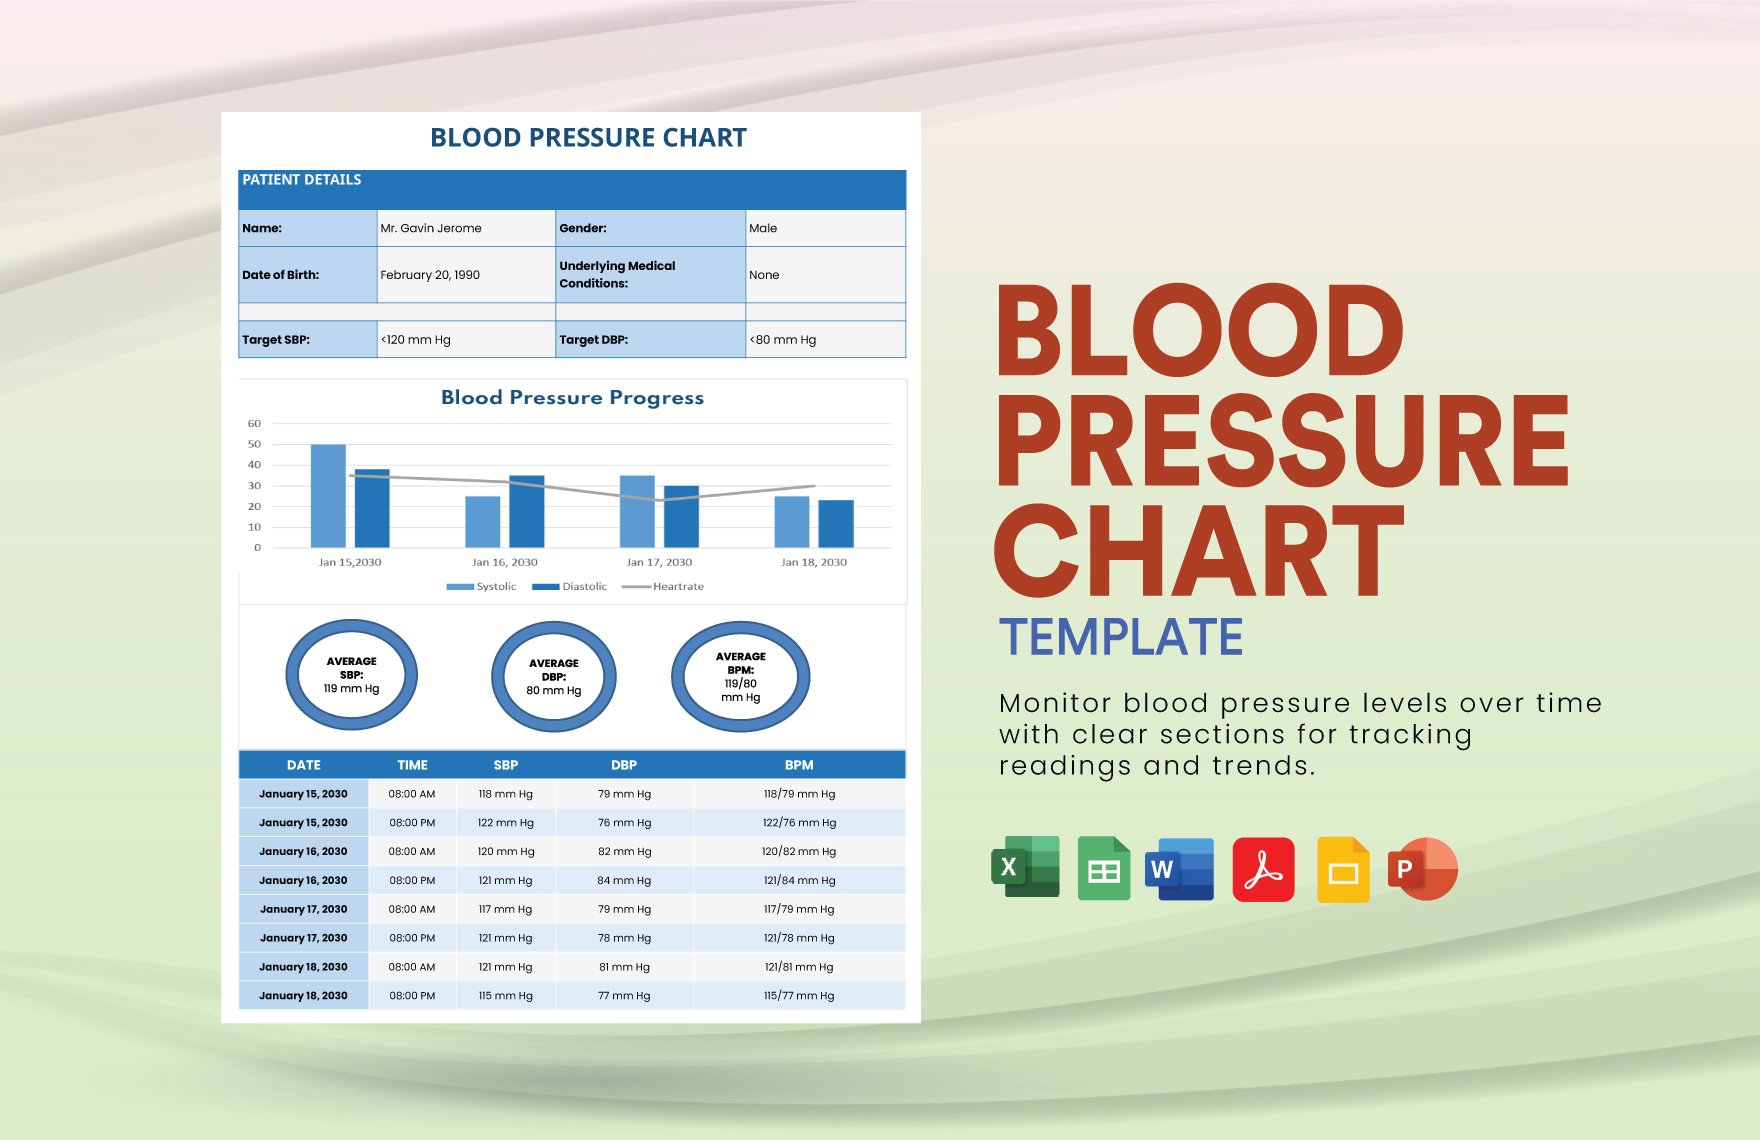 Blood Pressure Chart Template in Word, Excel, PDF, Google Sheets, PowerPoint, Google Slides